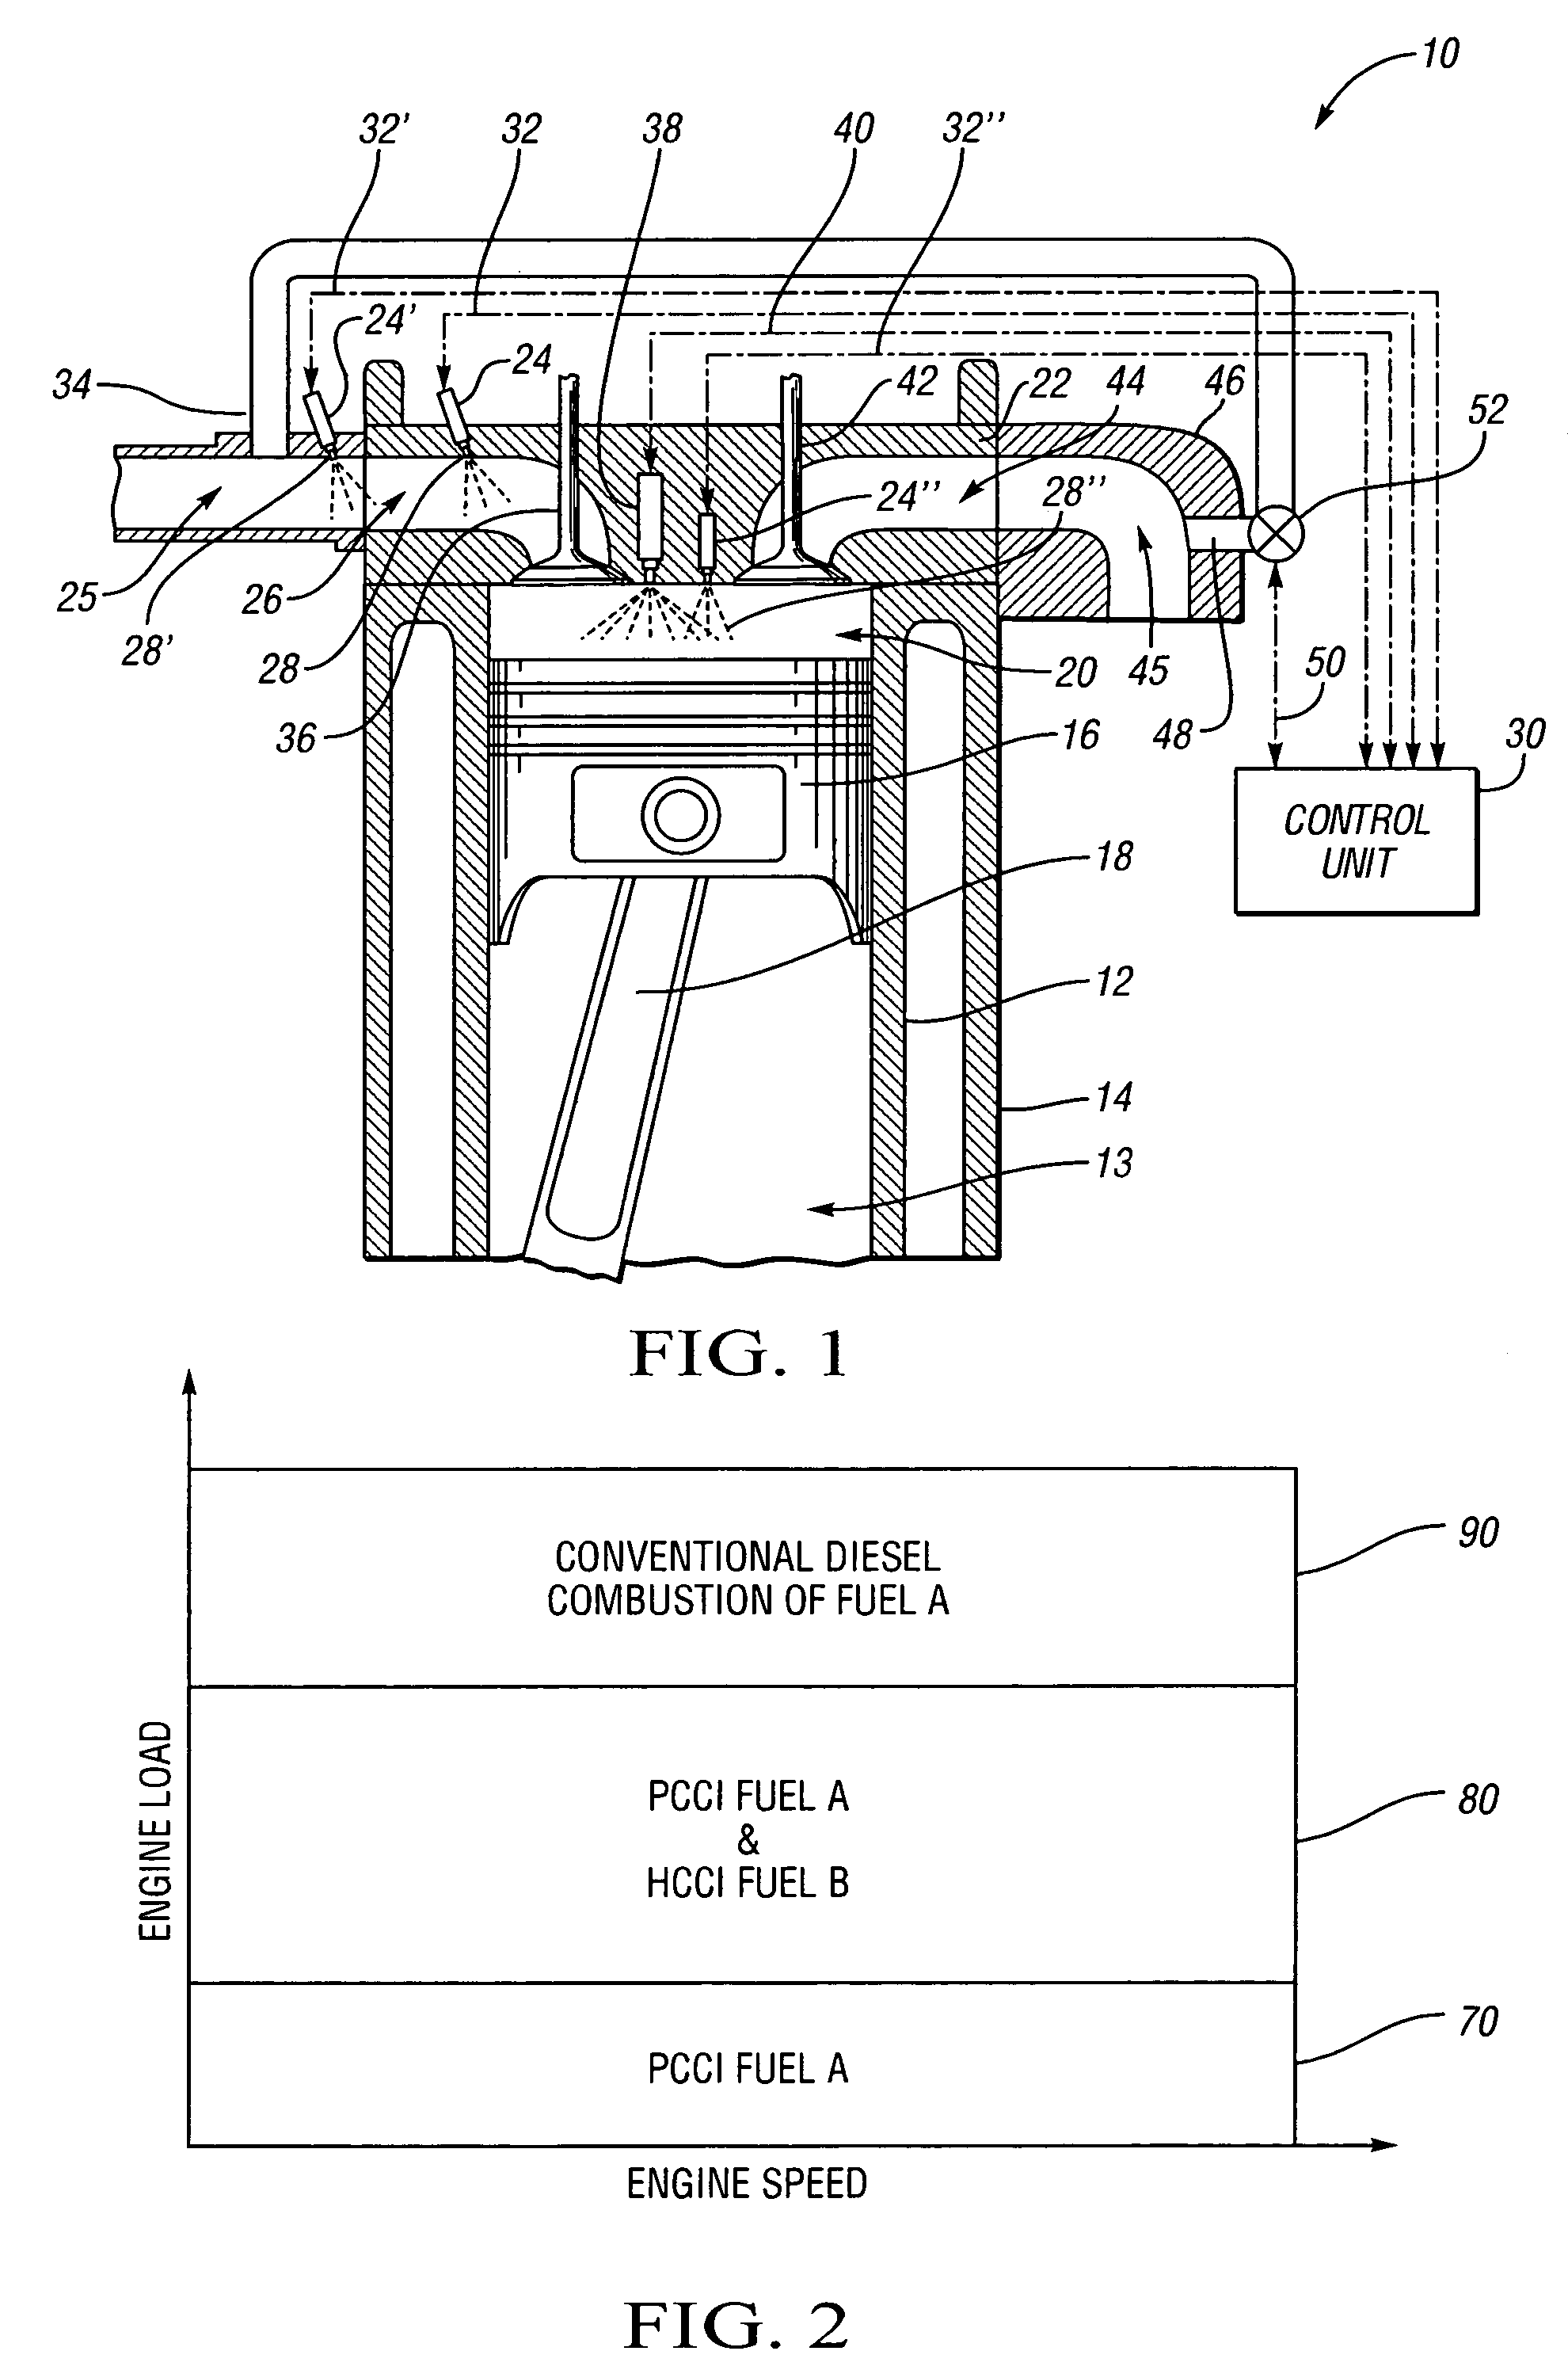 Compression-ignited IC engine and method of operation